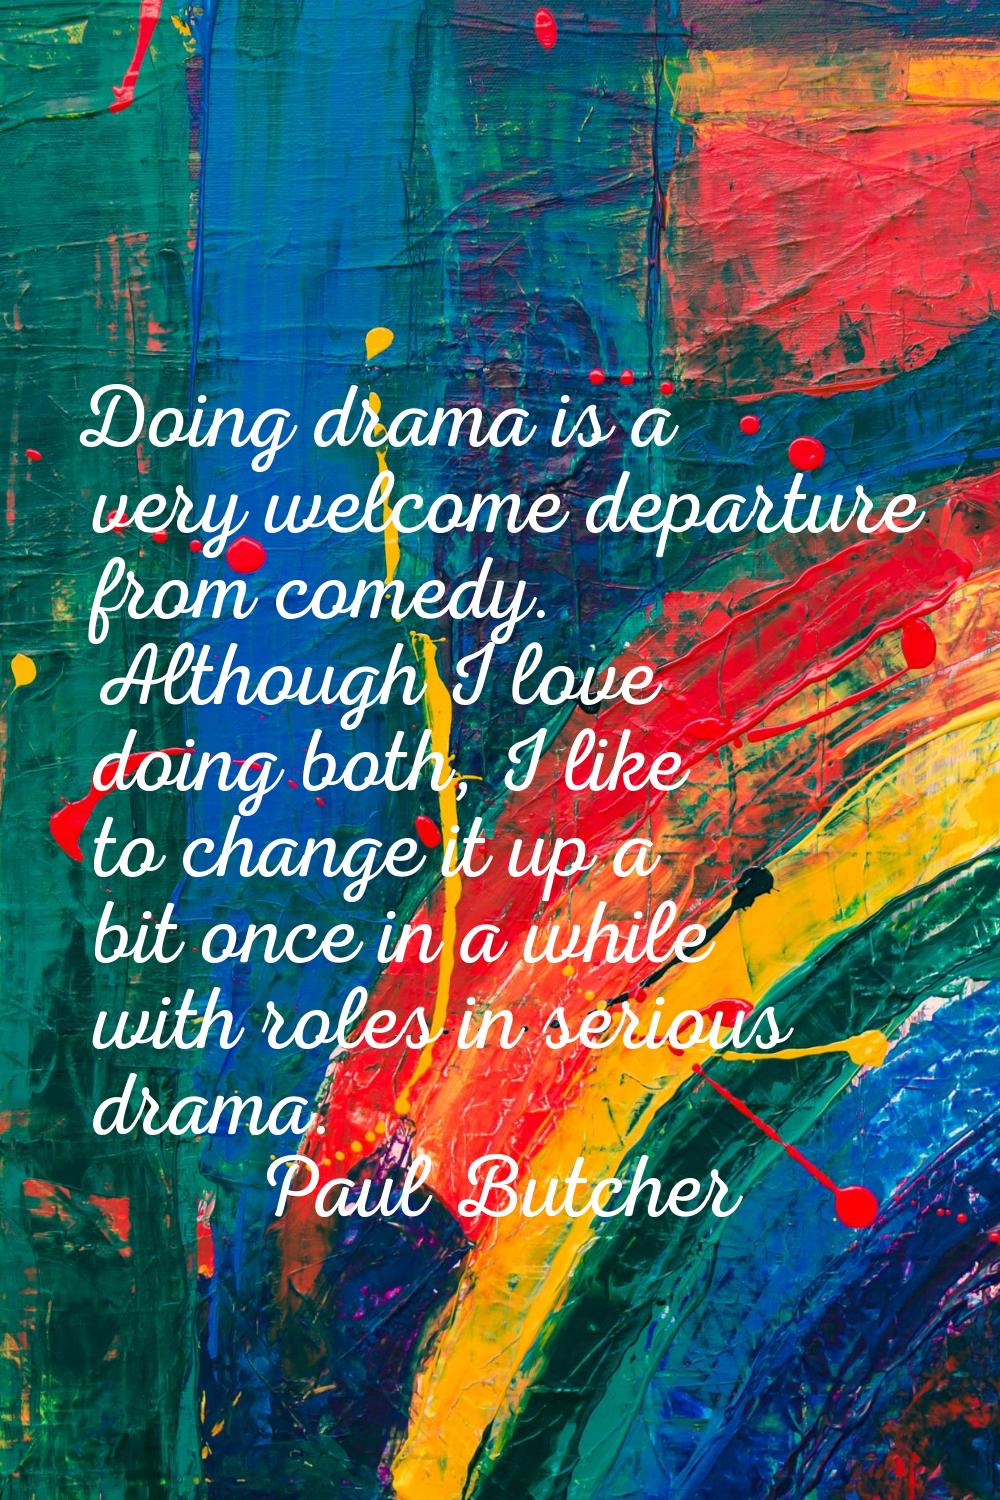 Doing drama is a very welcome departure from comedy. Although I love doing both, I like to change i